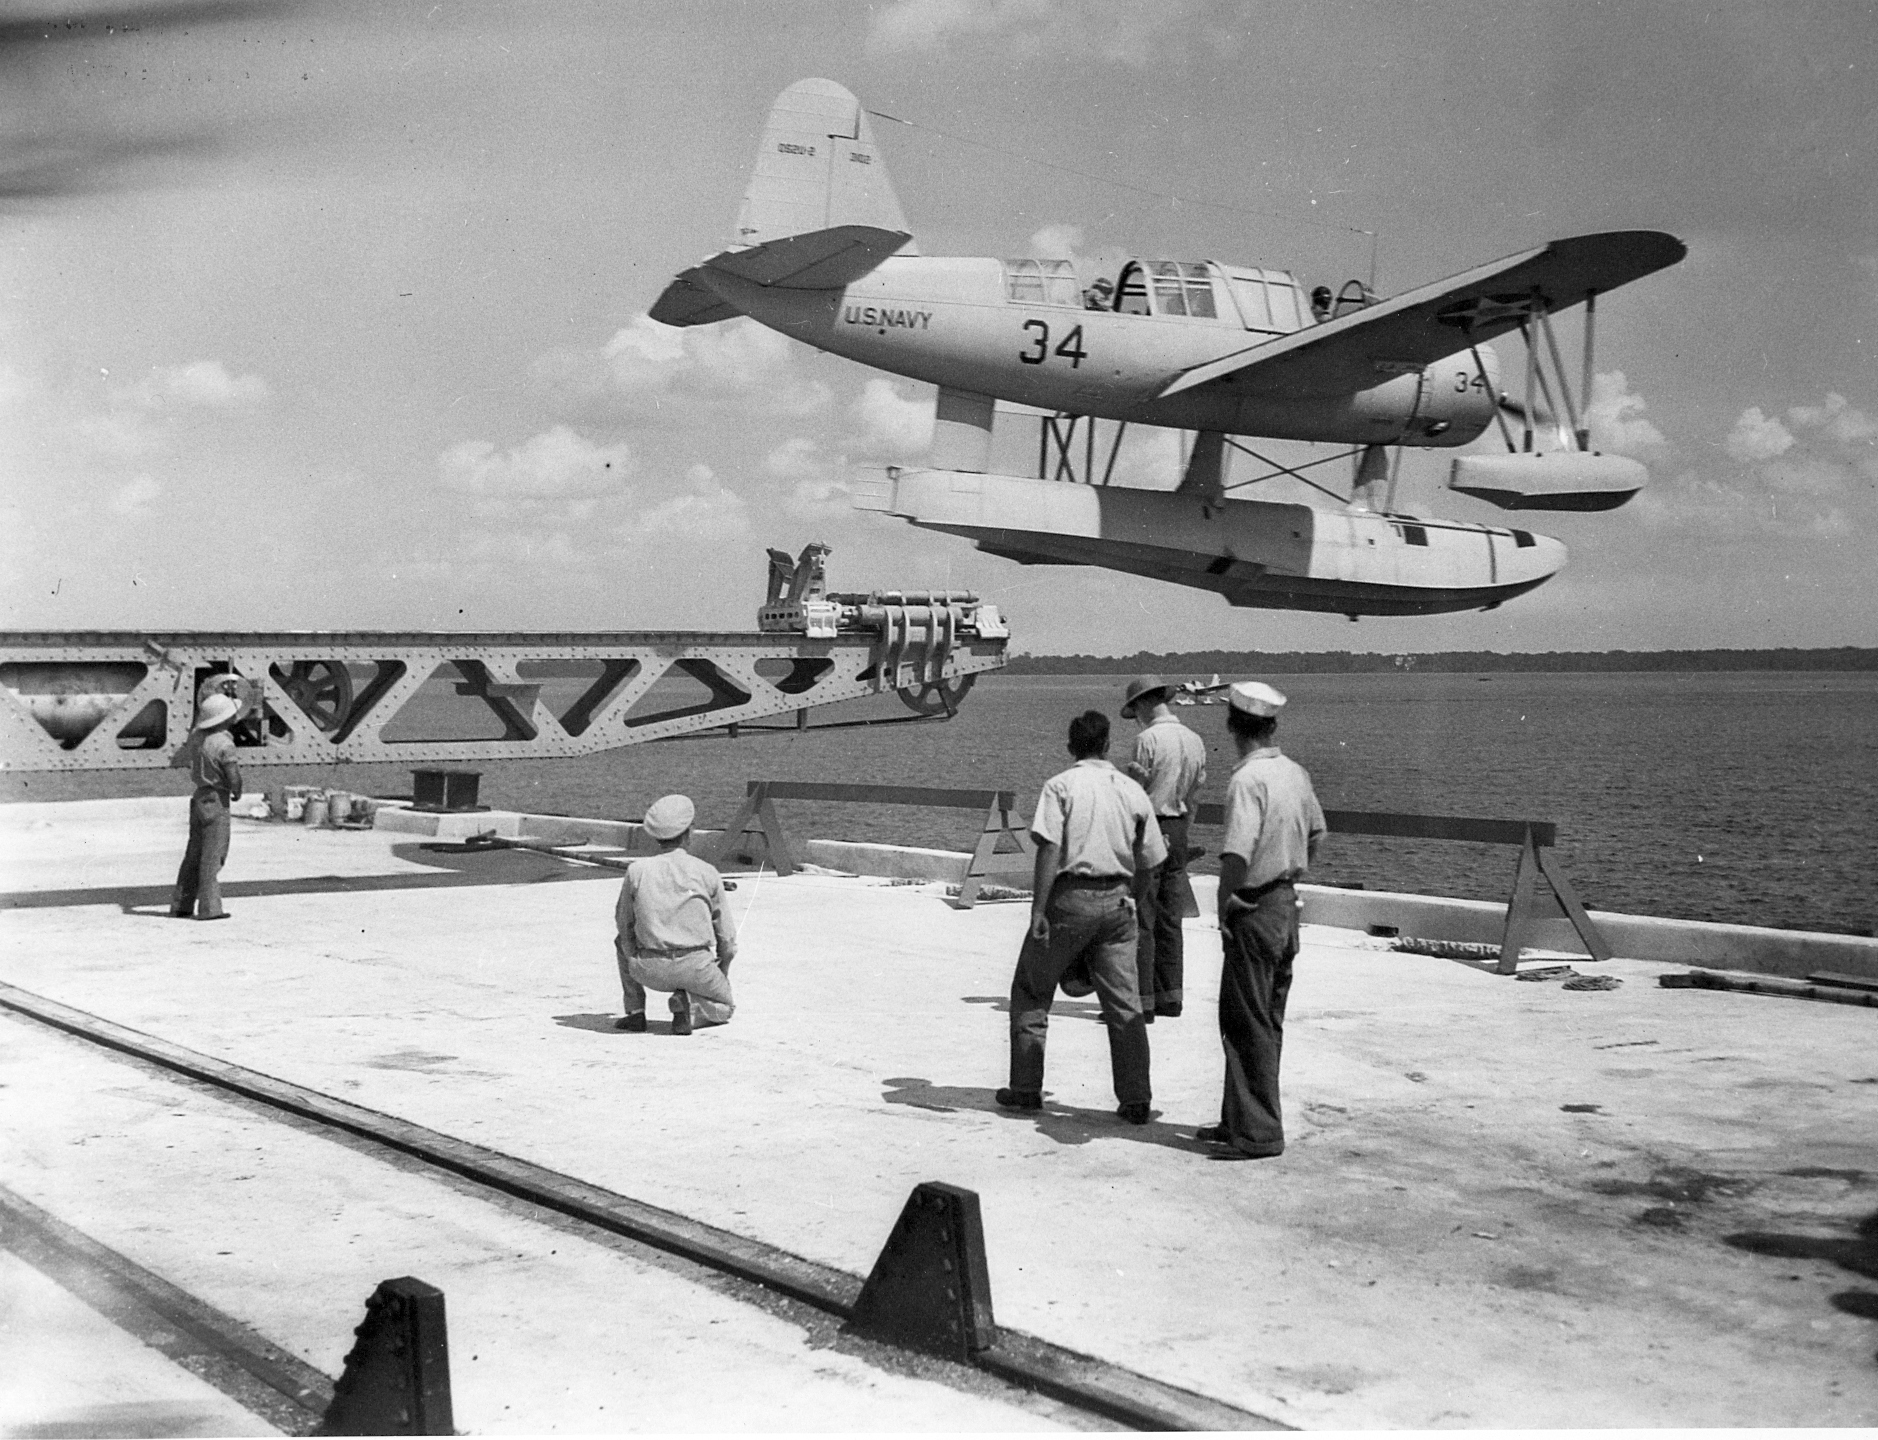 OS2U Kingfisher float plane being shot off a catapult mounted on a dock for training purposes at Pensacola, Florida, United States, pre-war 1941.